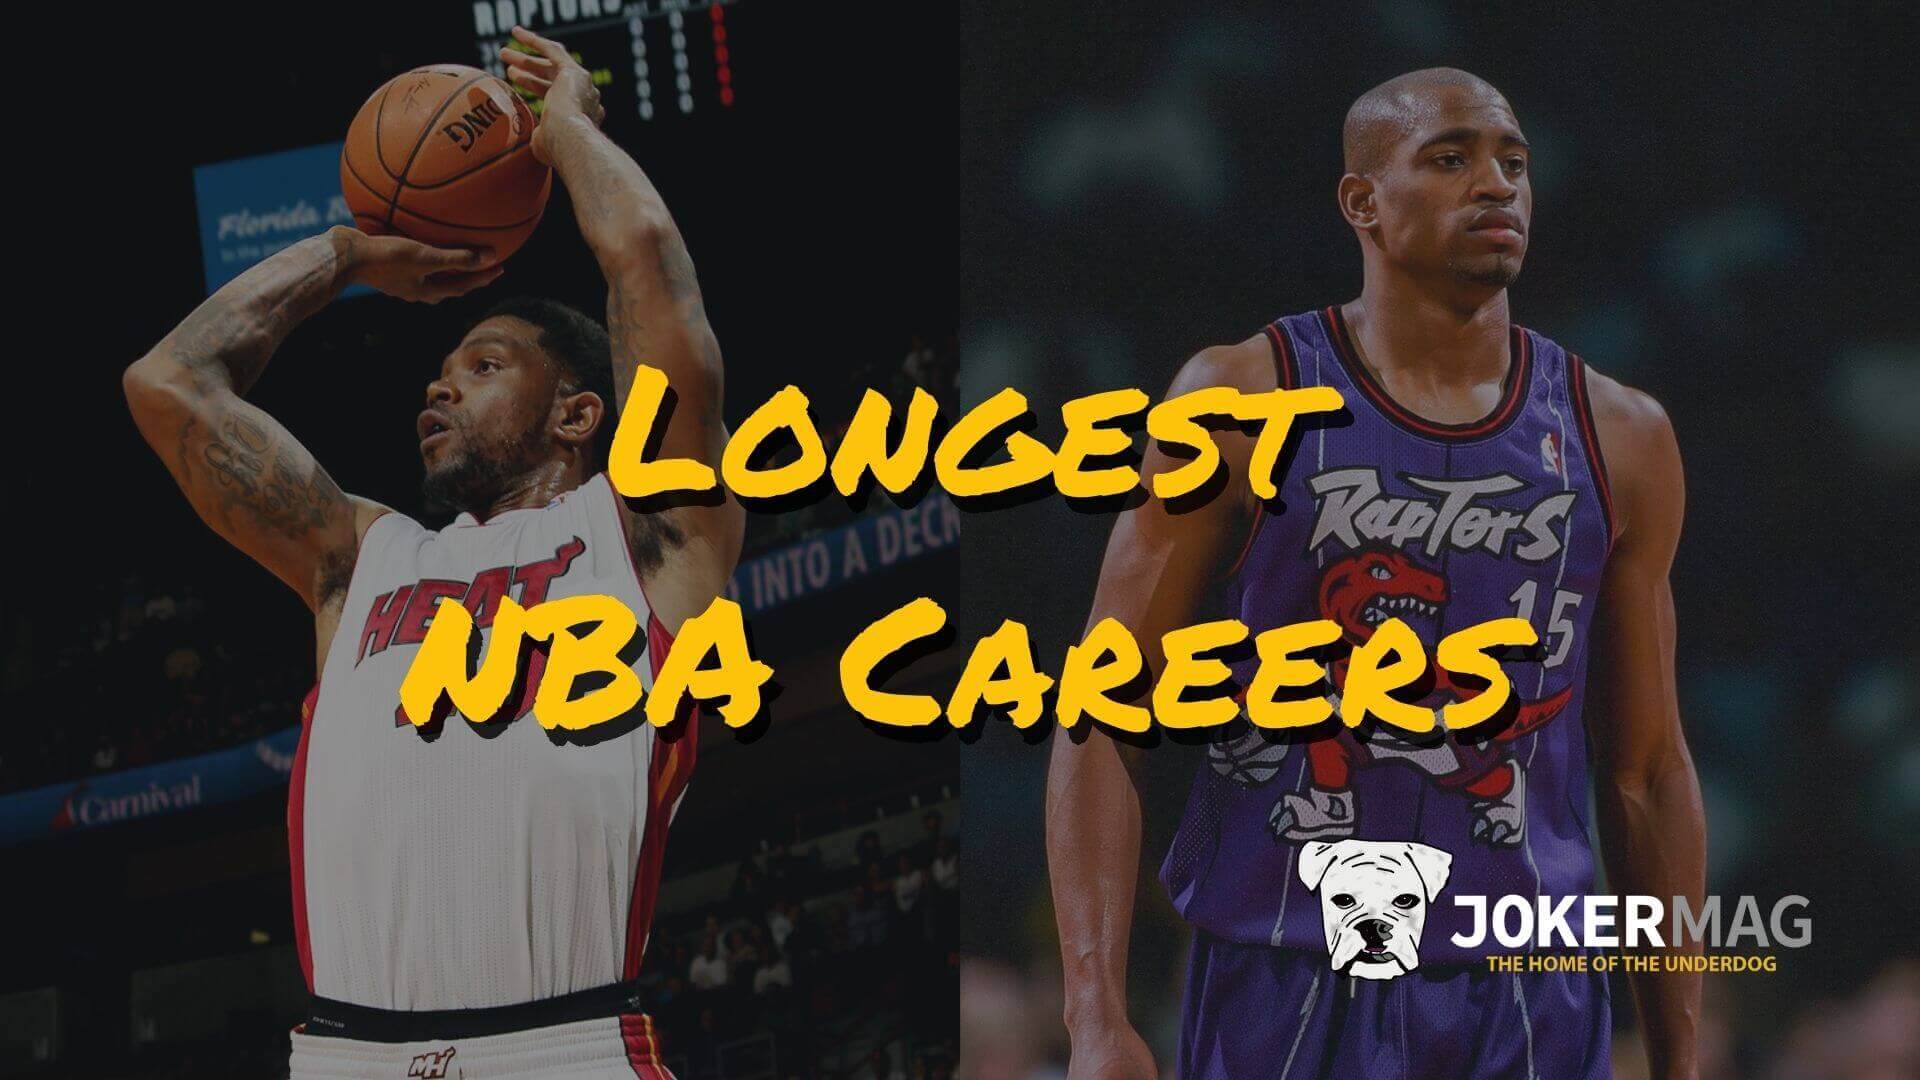 Vince Carter and Udonis Haslem boast some of the longest NBA careers of all time